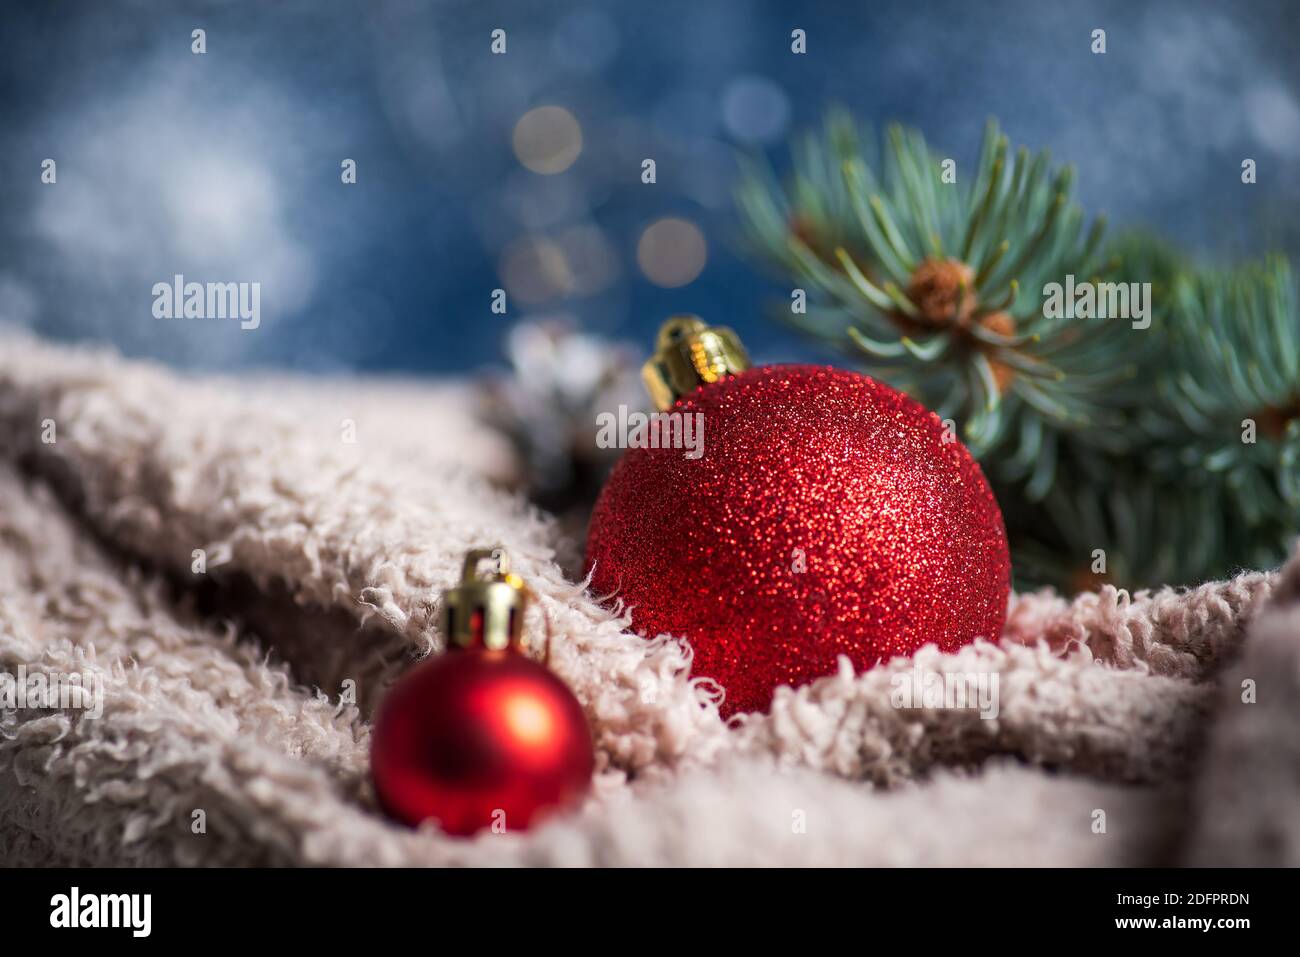 Red Christmas ball ornament with winter holiday festive background Stock Photo